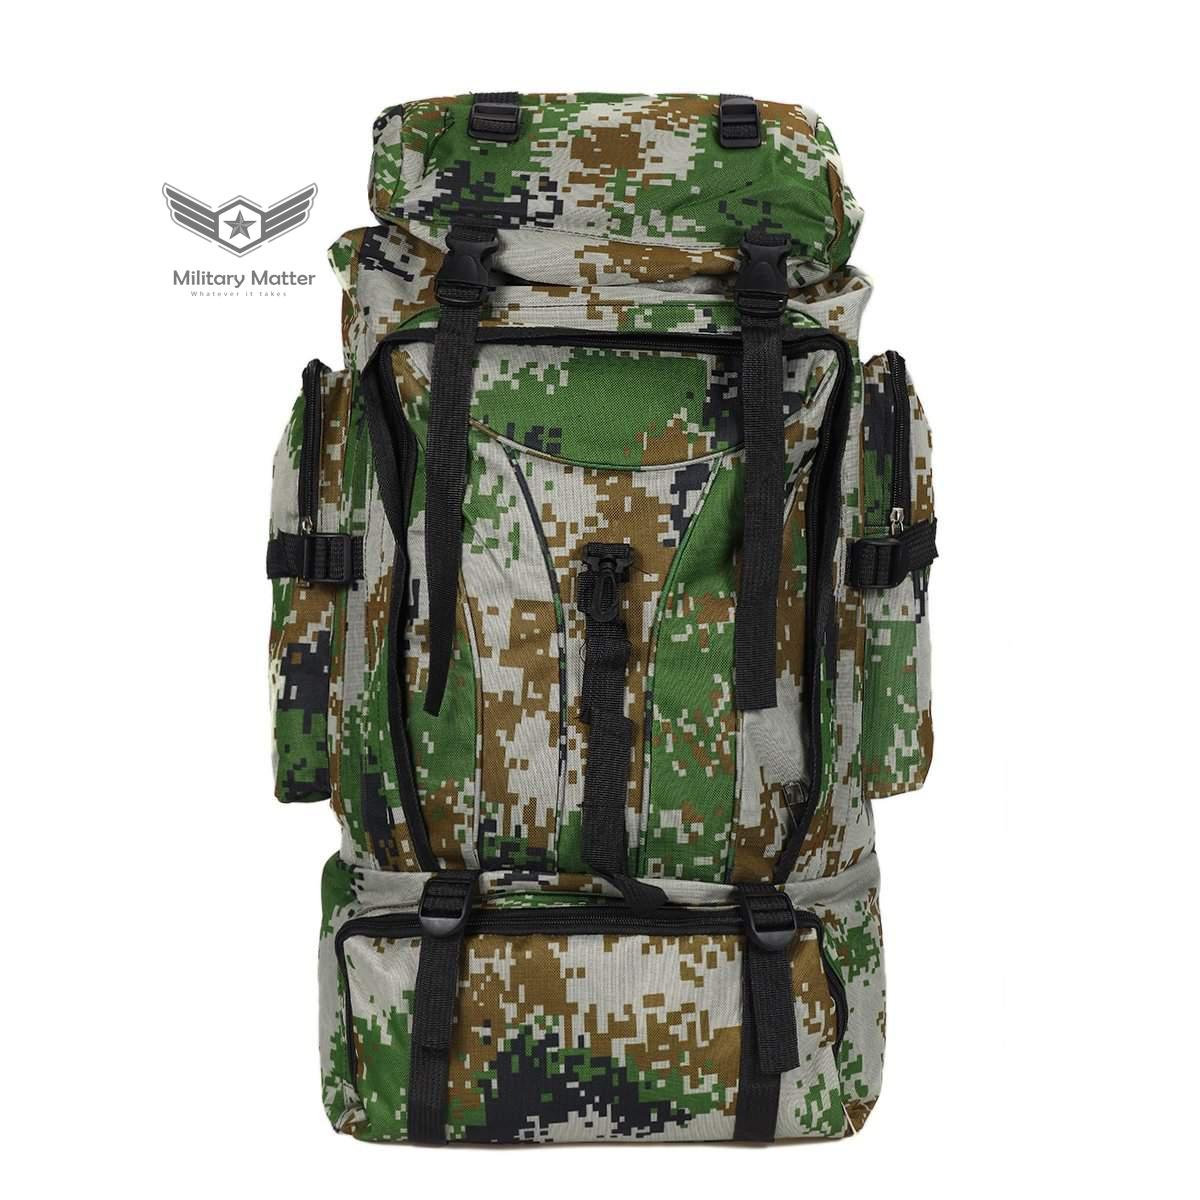  Military Matter Folding Military Tactical Backpack | The Best CS Tactical Clothing Store